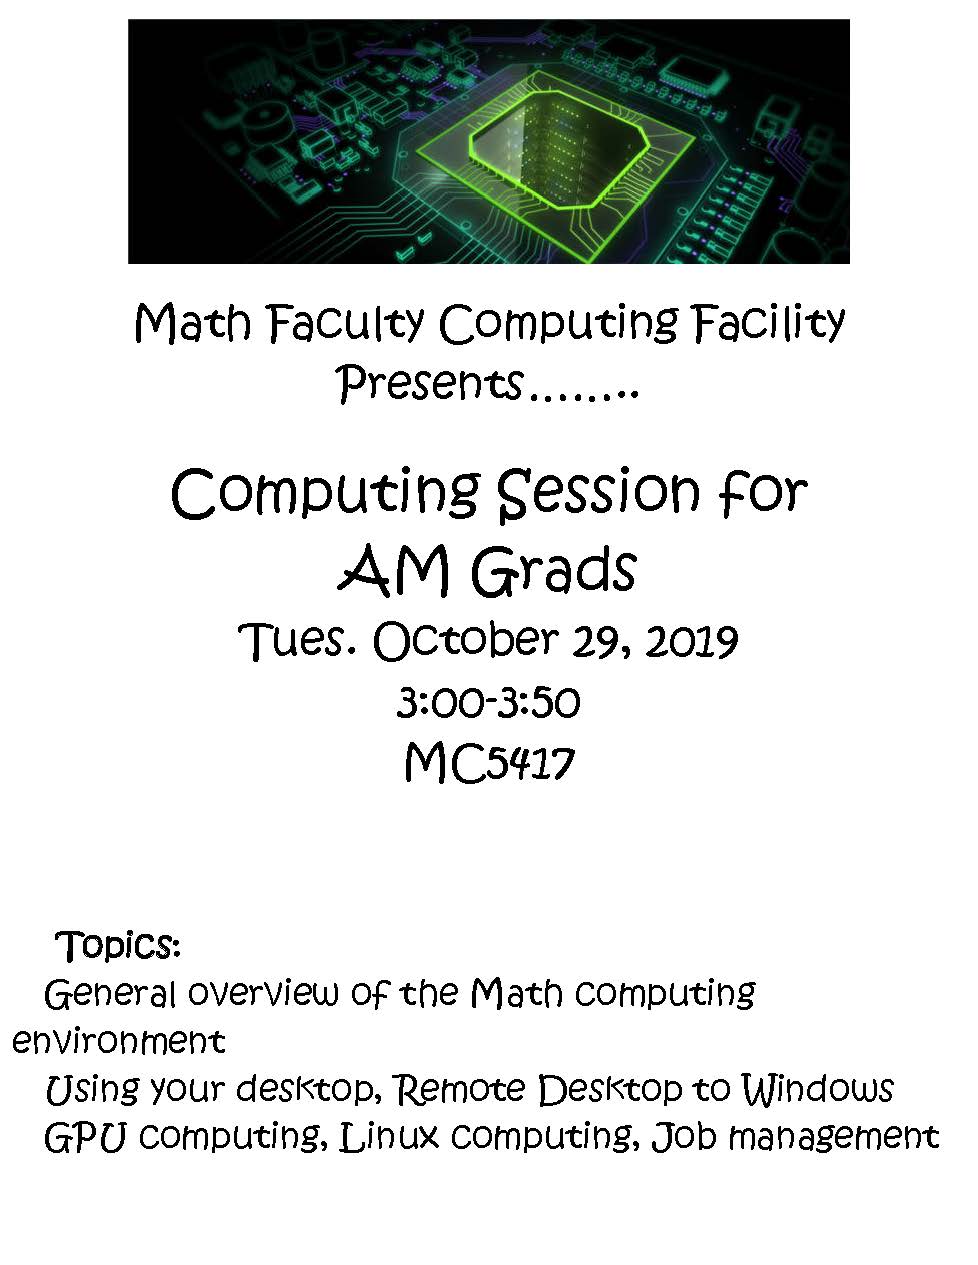 Flyer for grad computing session